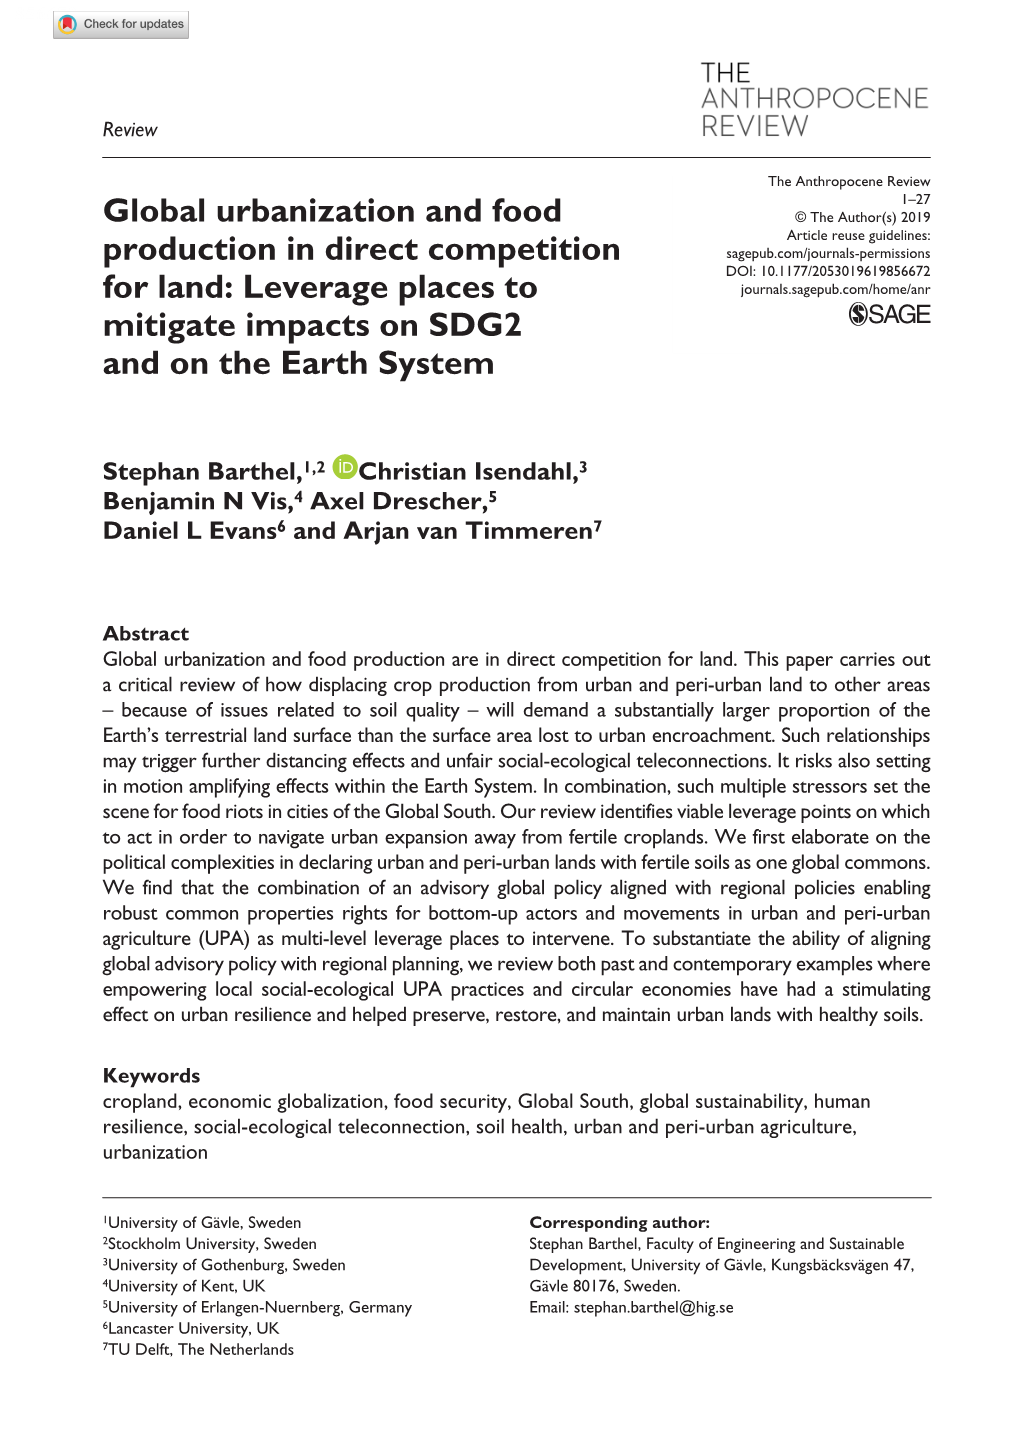 Global Urbanization and Food Production in Direct Competition For